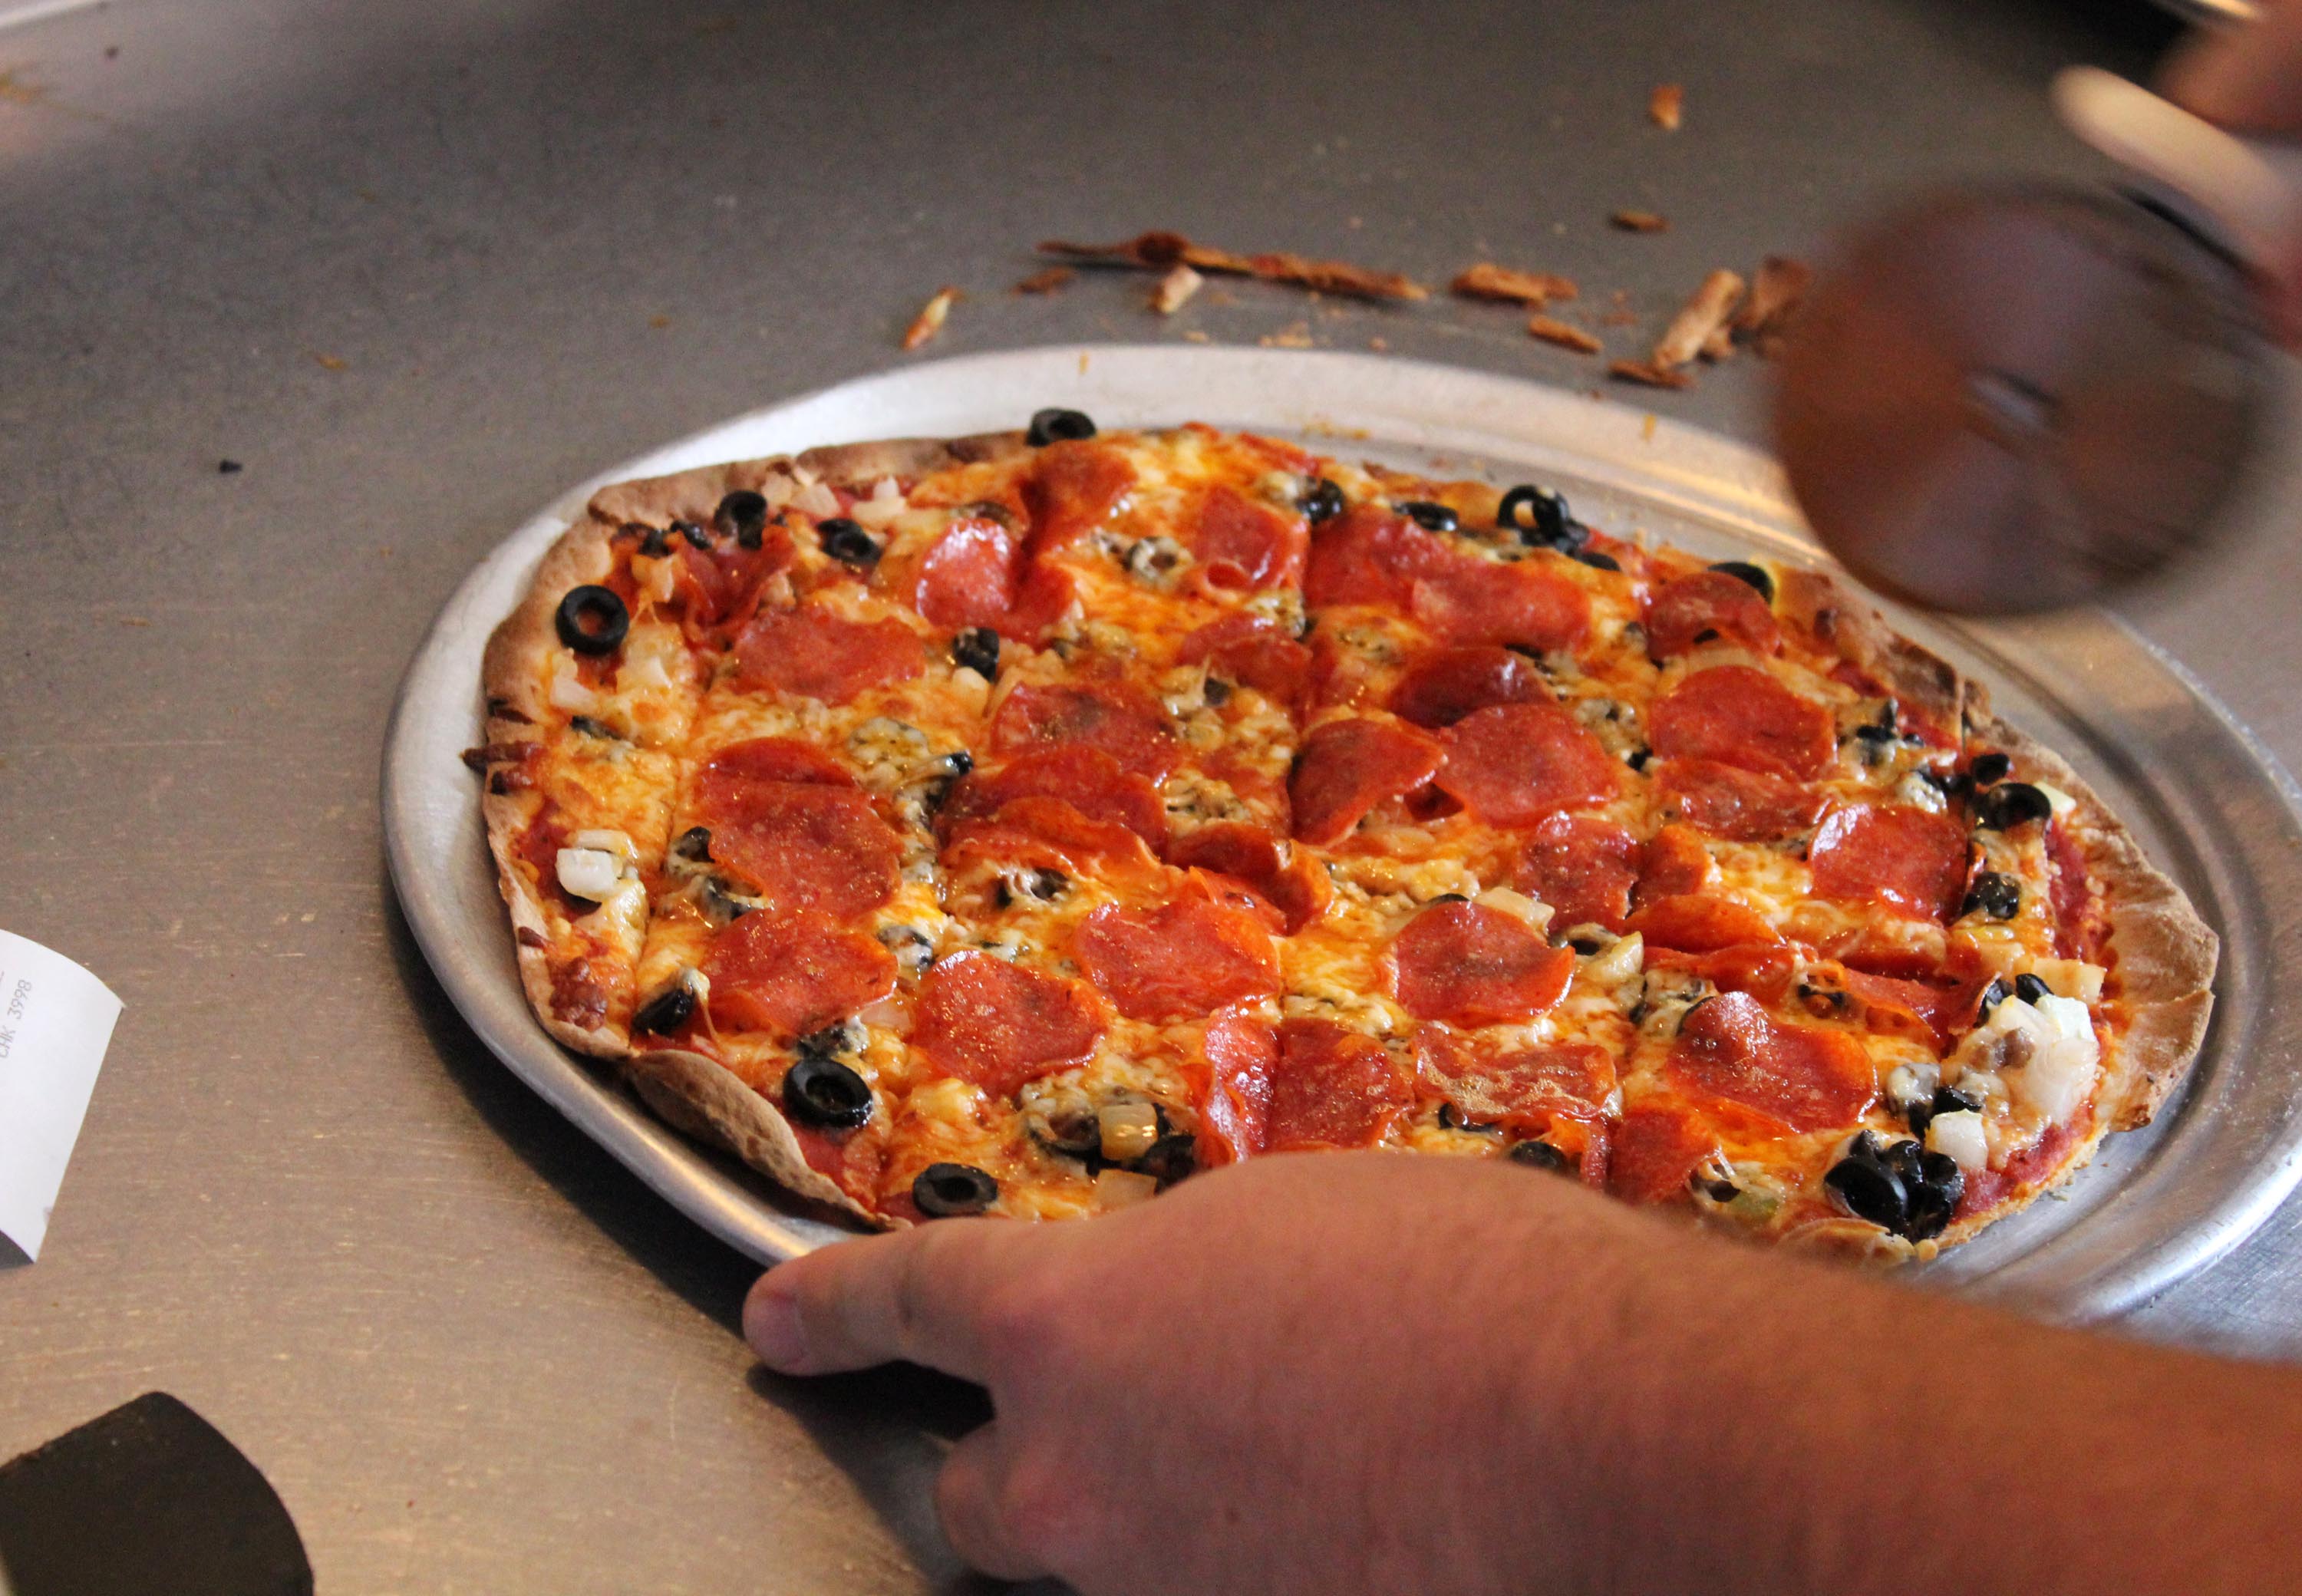 Online pizza ordering is taking over